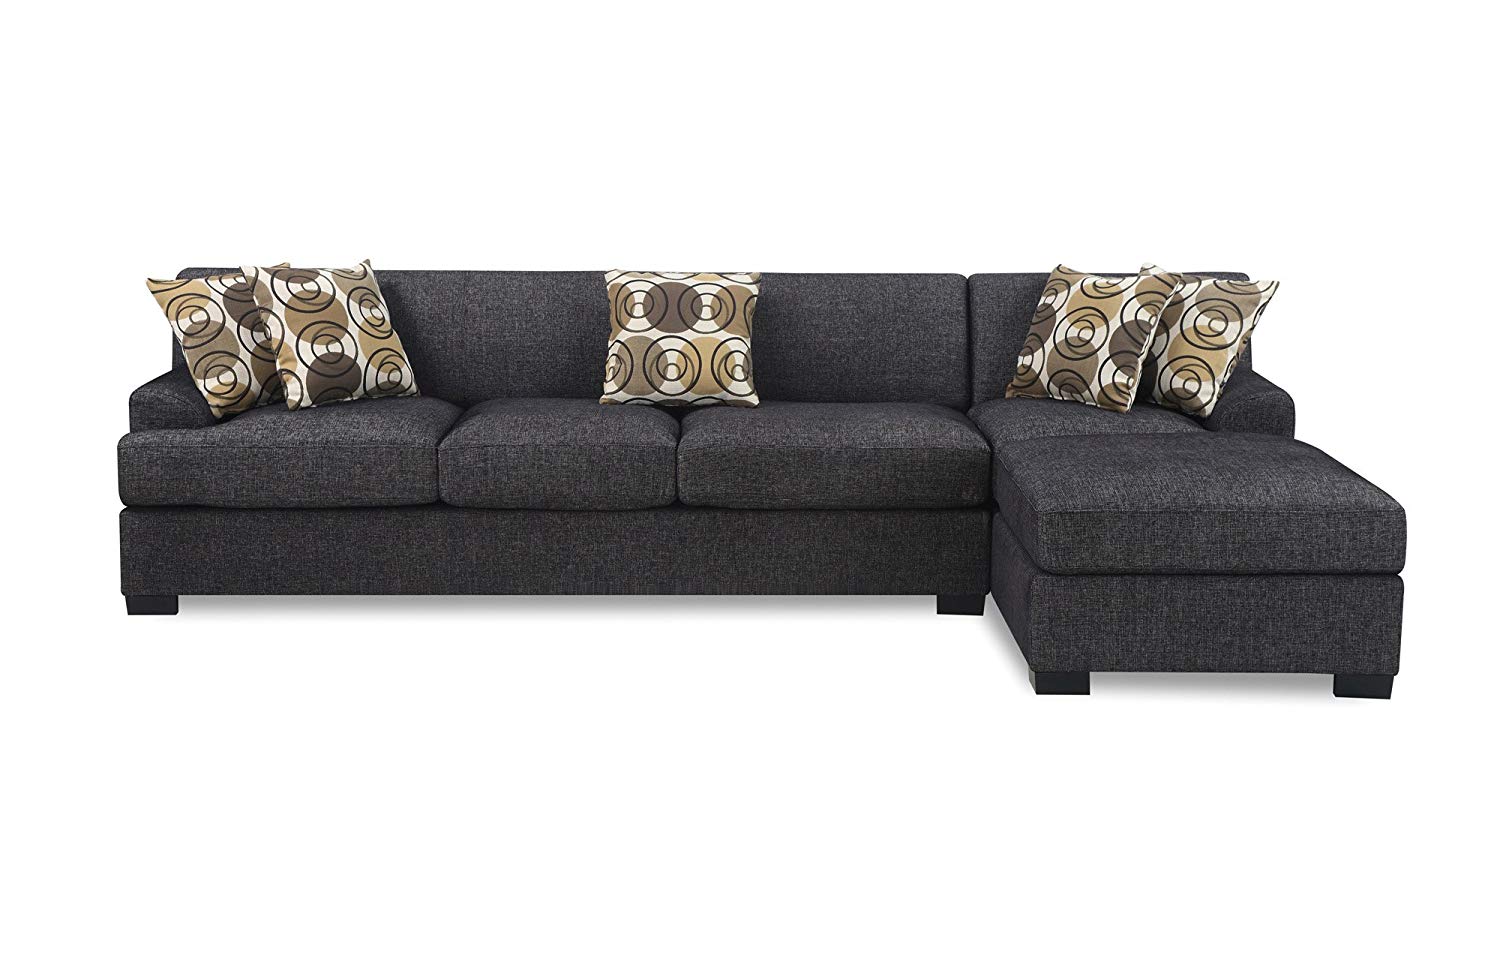 chaise couch amazon.com: bobkona benford 2-piece chaise loveseat sectional sofa  collection with faux linen, TJPCCMM